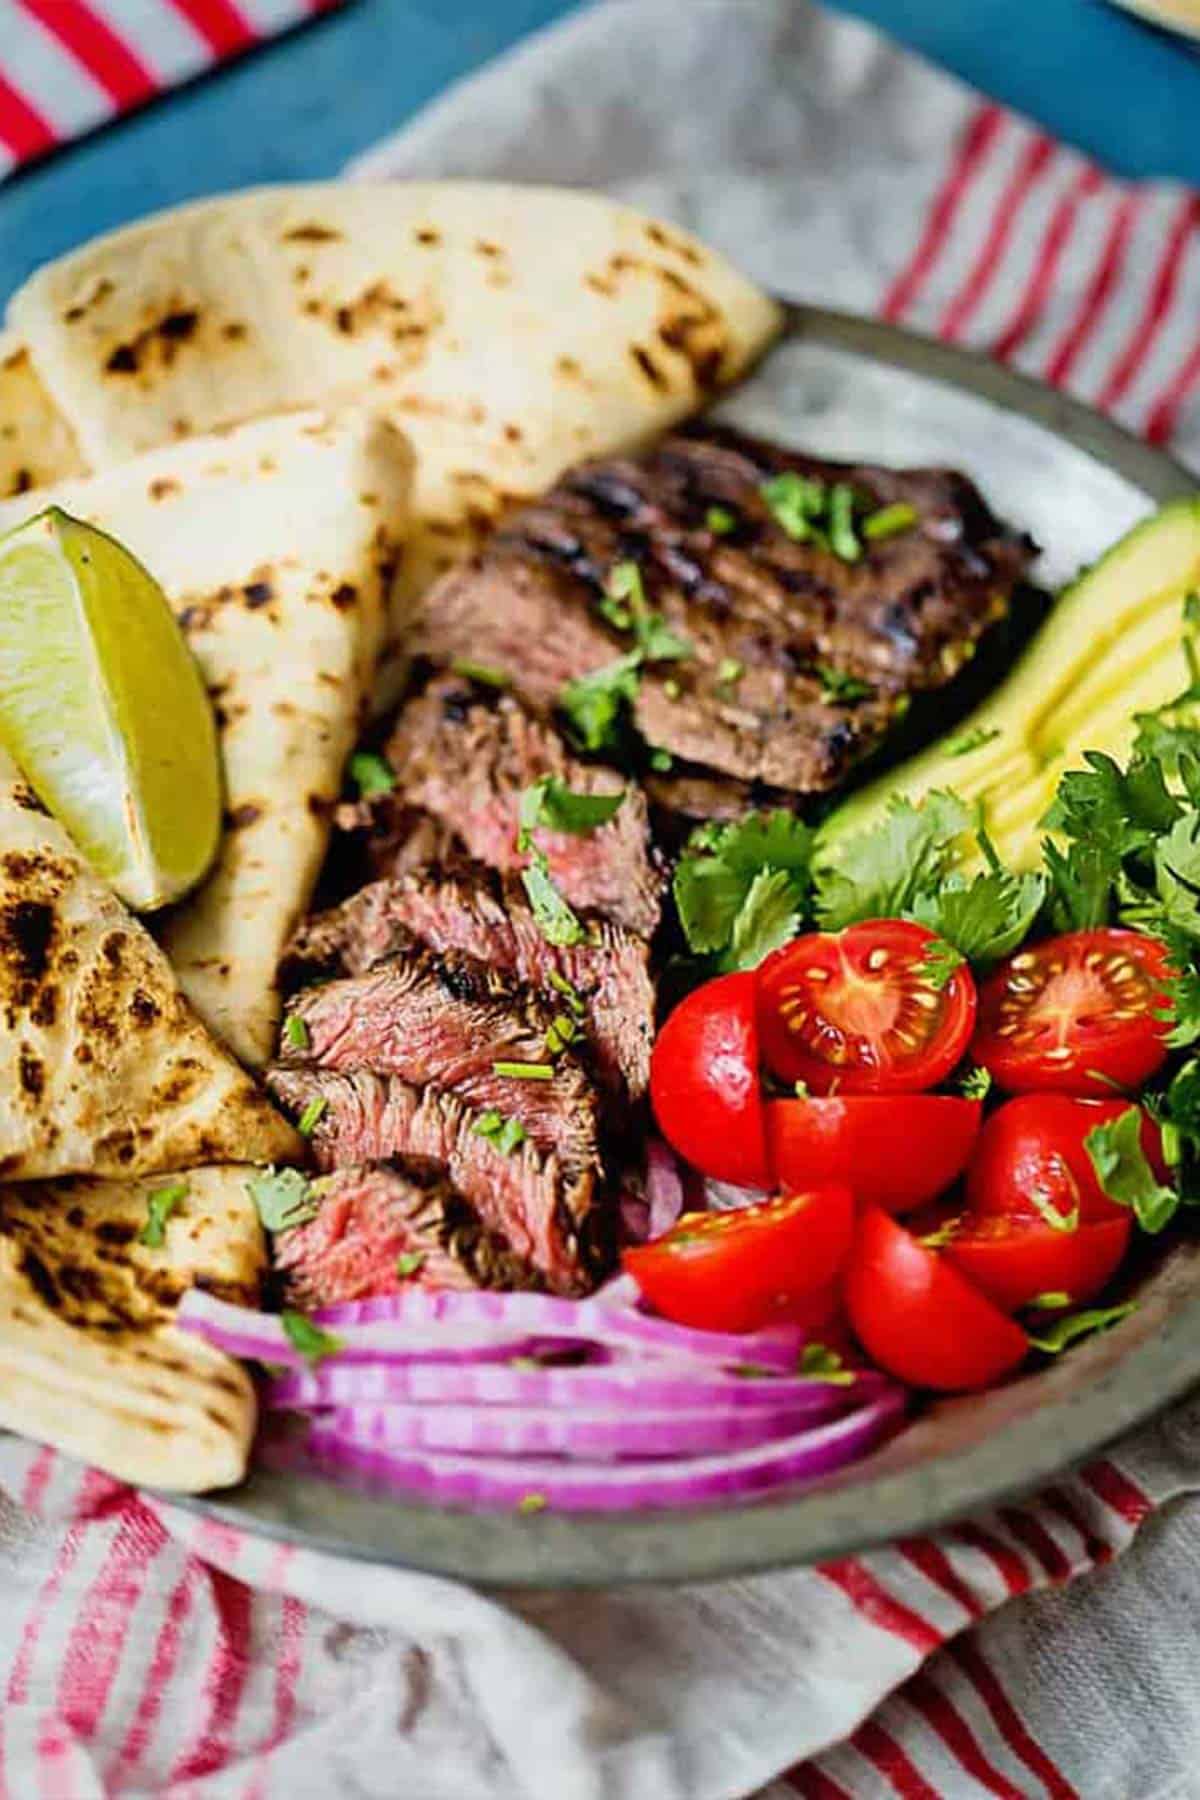 Sliced carne asada served on a platter with tortillas, tomatoes, avocado and onions.